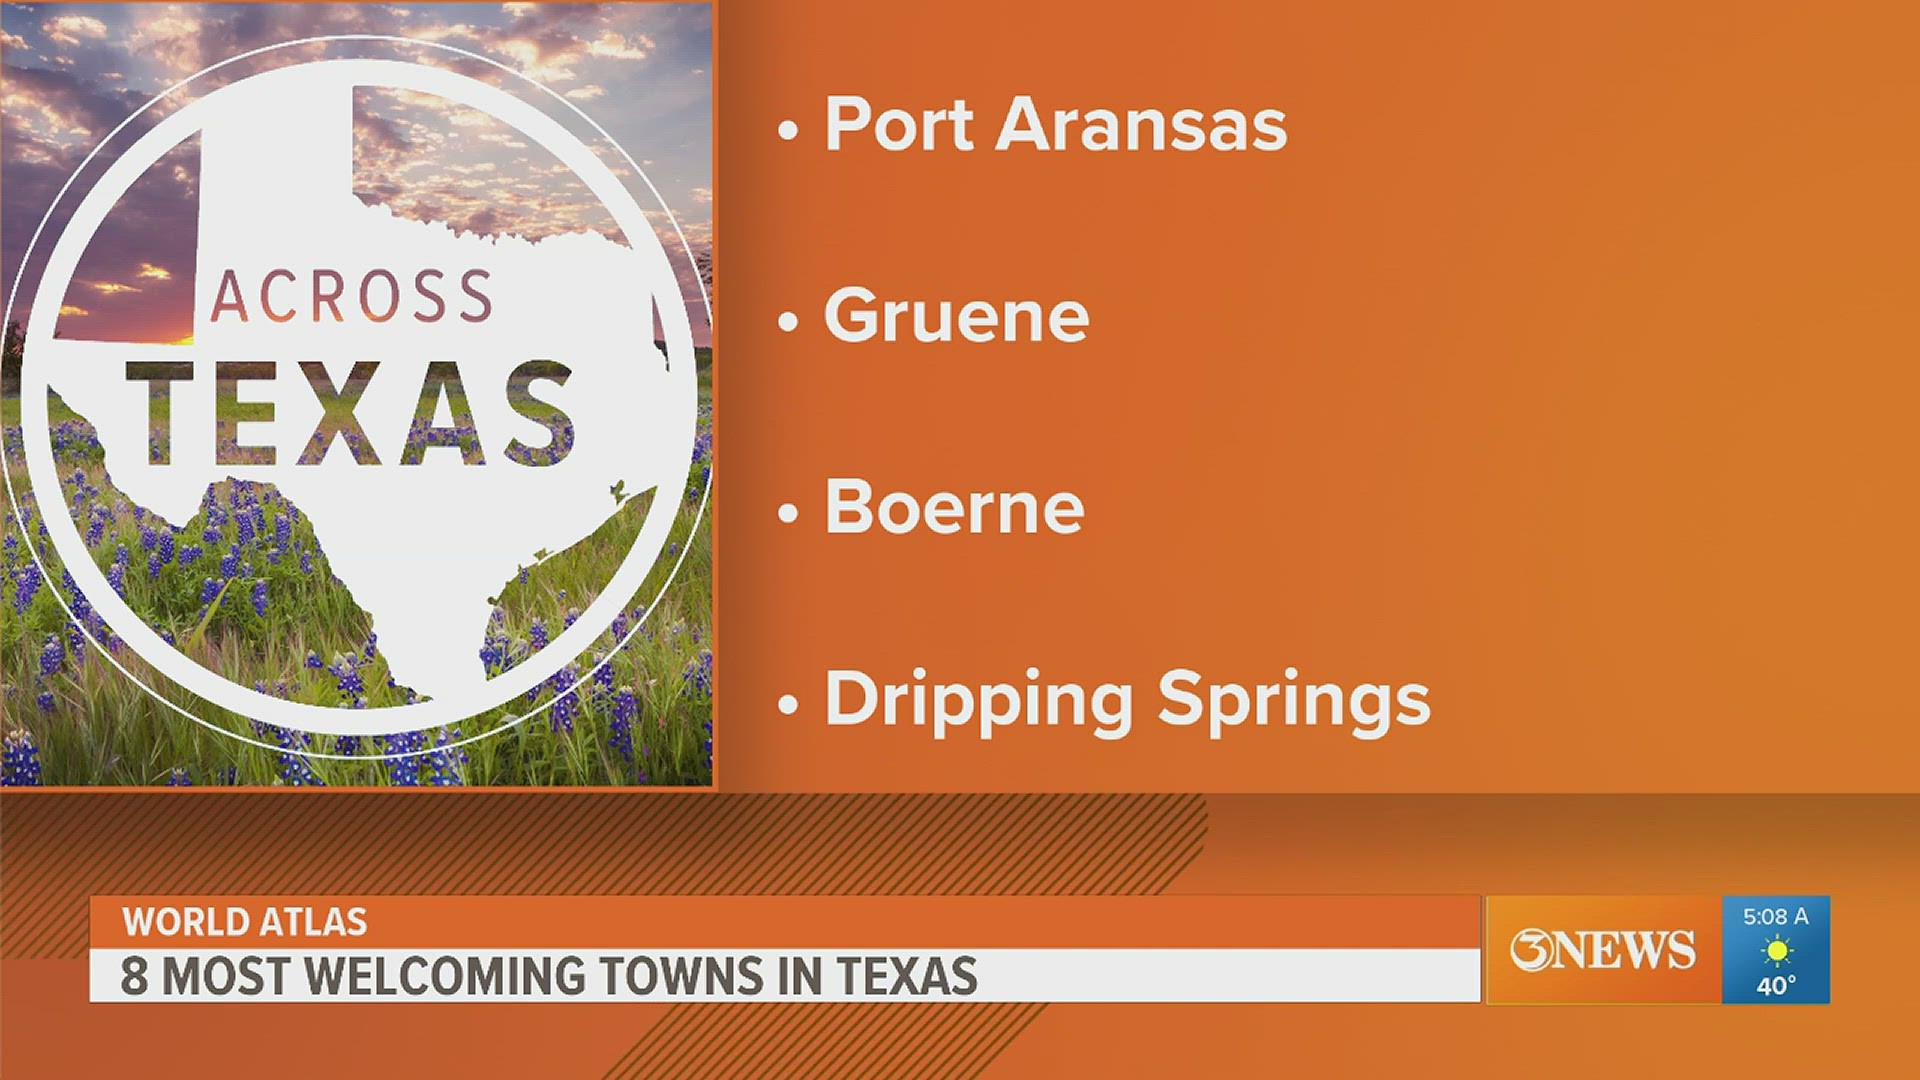 World Atlas has named Port Aransas as one of the eight most welcoming cities in Texas.